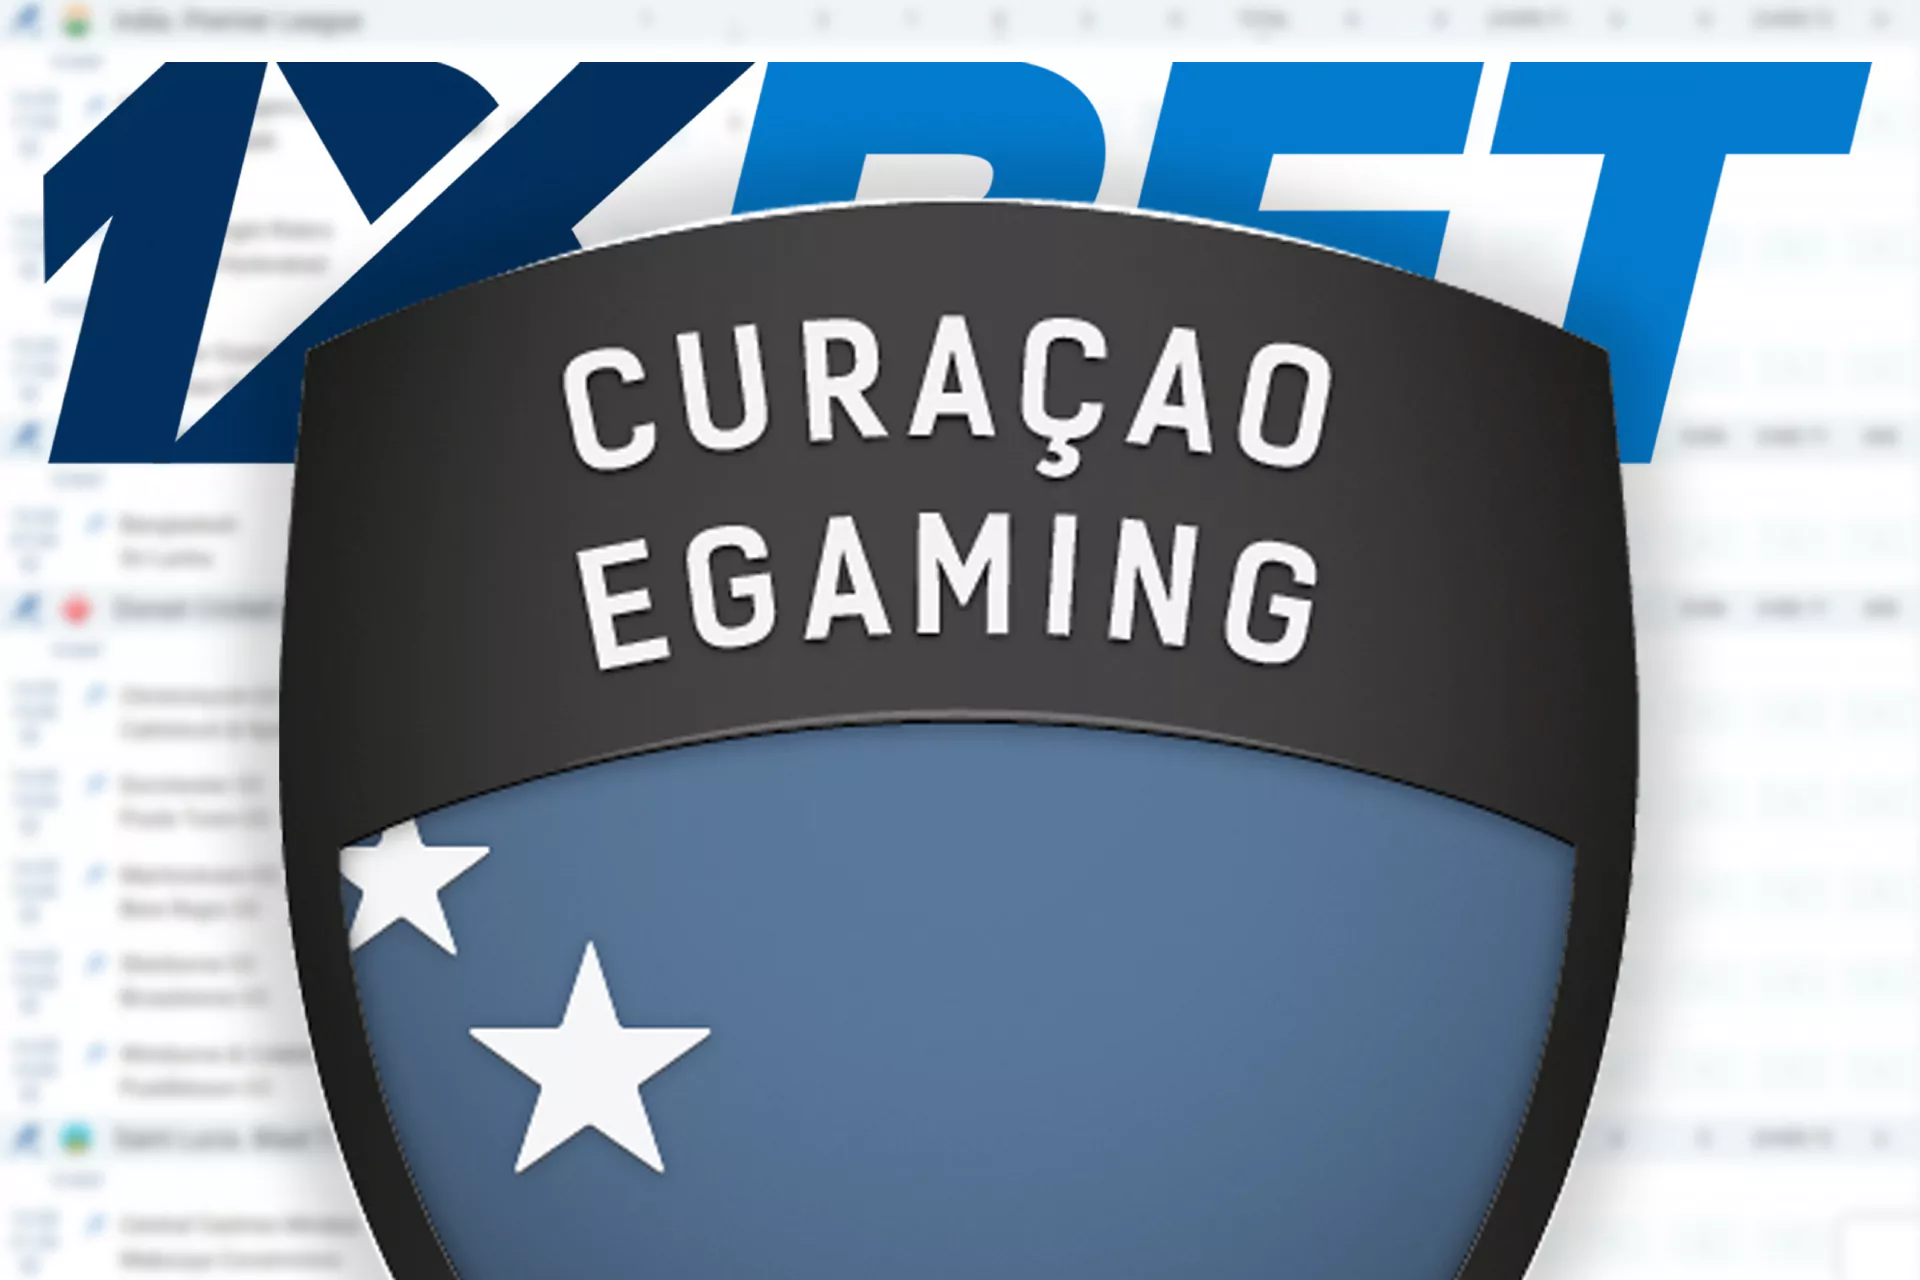 1xBet operates under an official Curacao license.